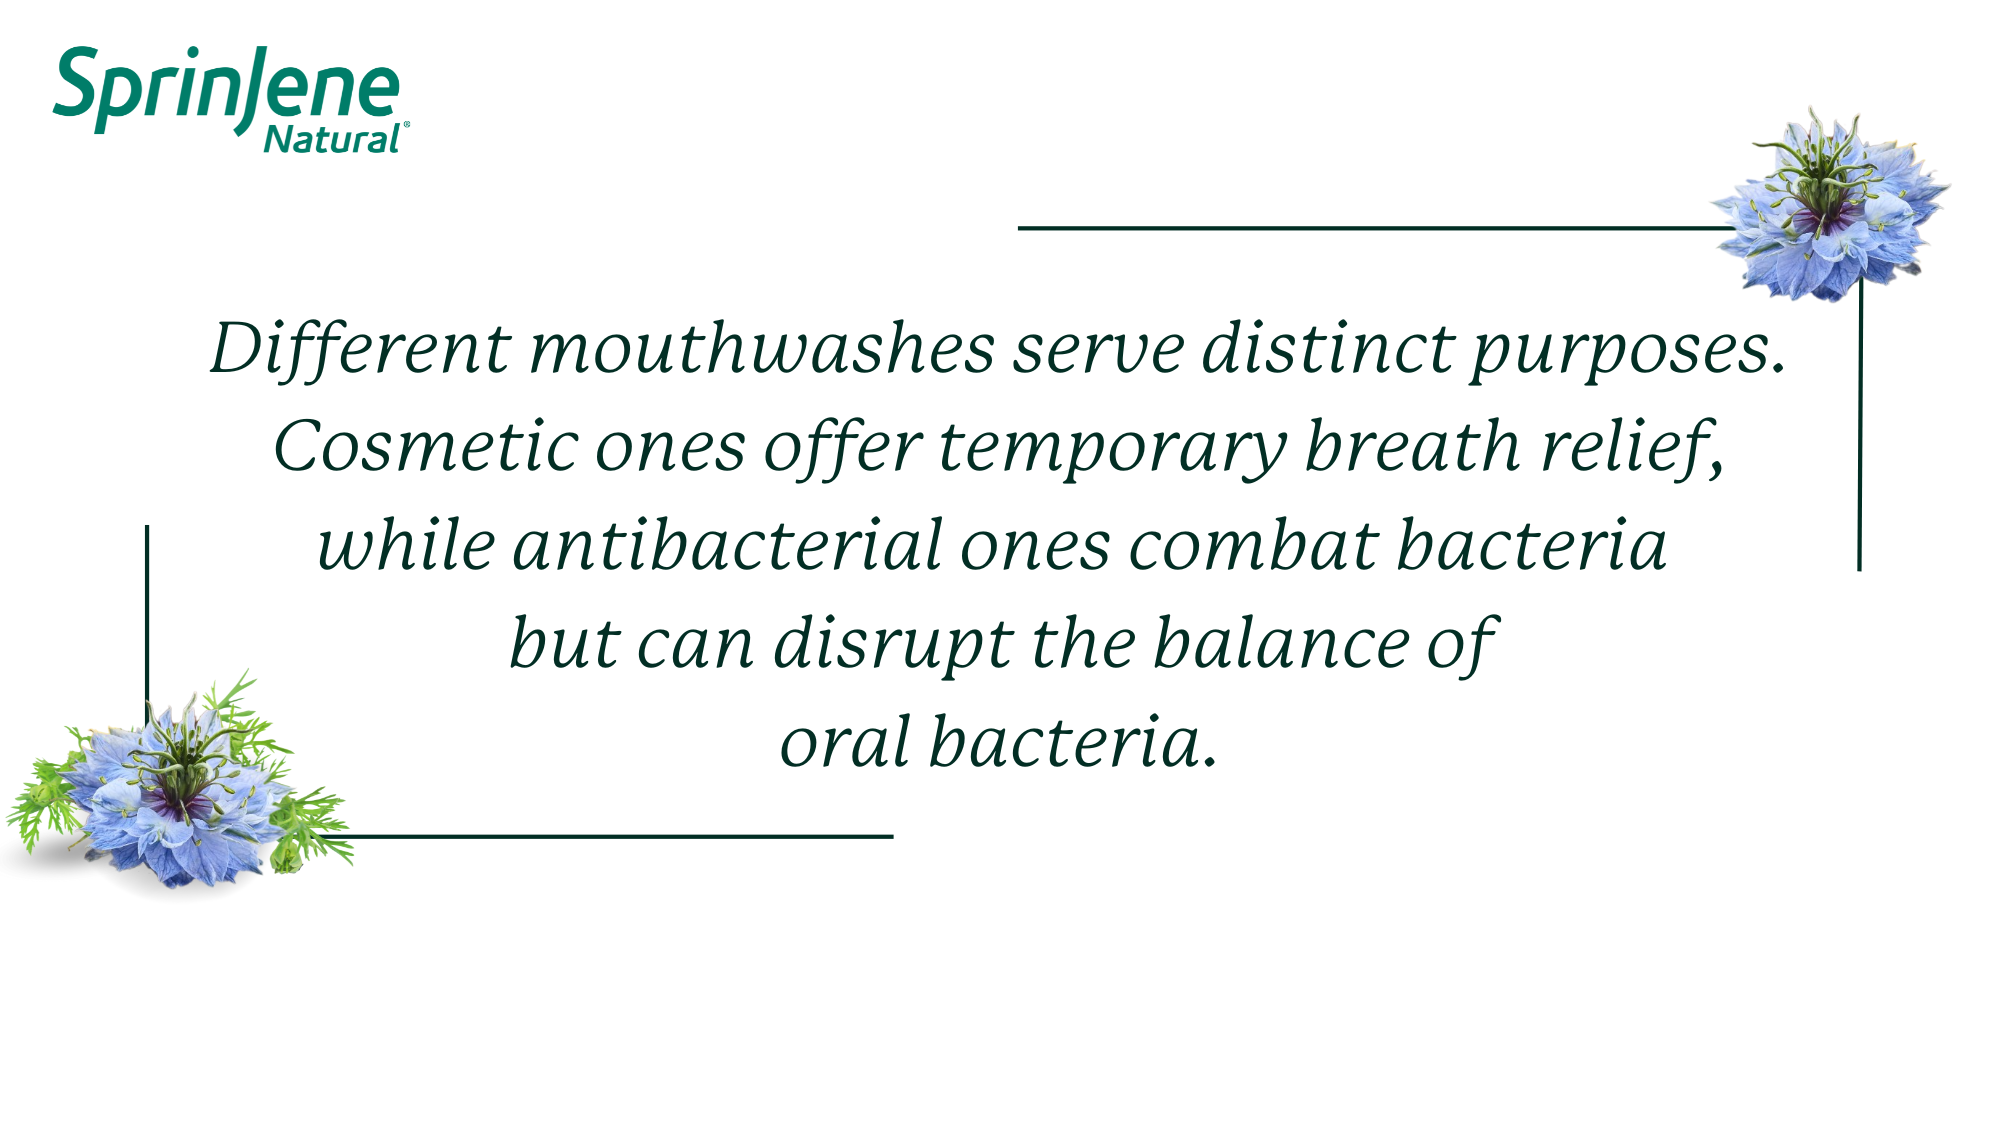 Different mouthwashes serve distinct purposes. Cosmetic ones offer temporary breath relief, while antibacterial ones combat bacteria  but can disrupt the balance of oral bacteria.